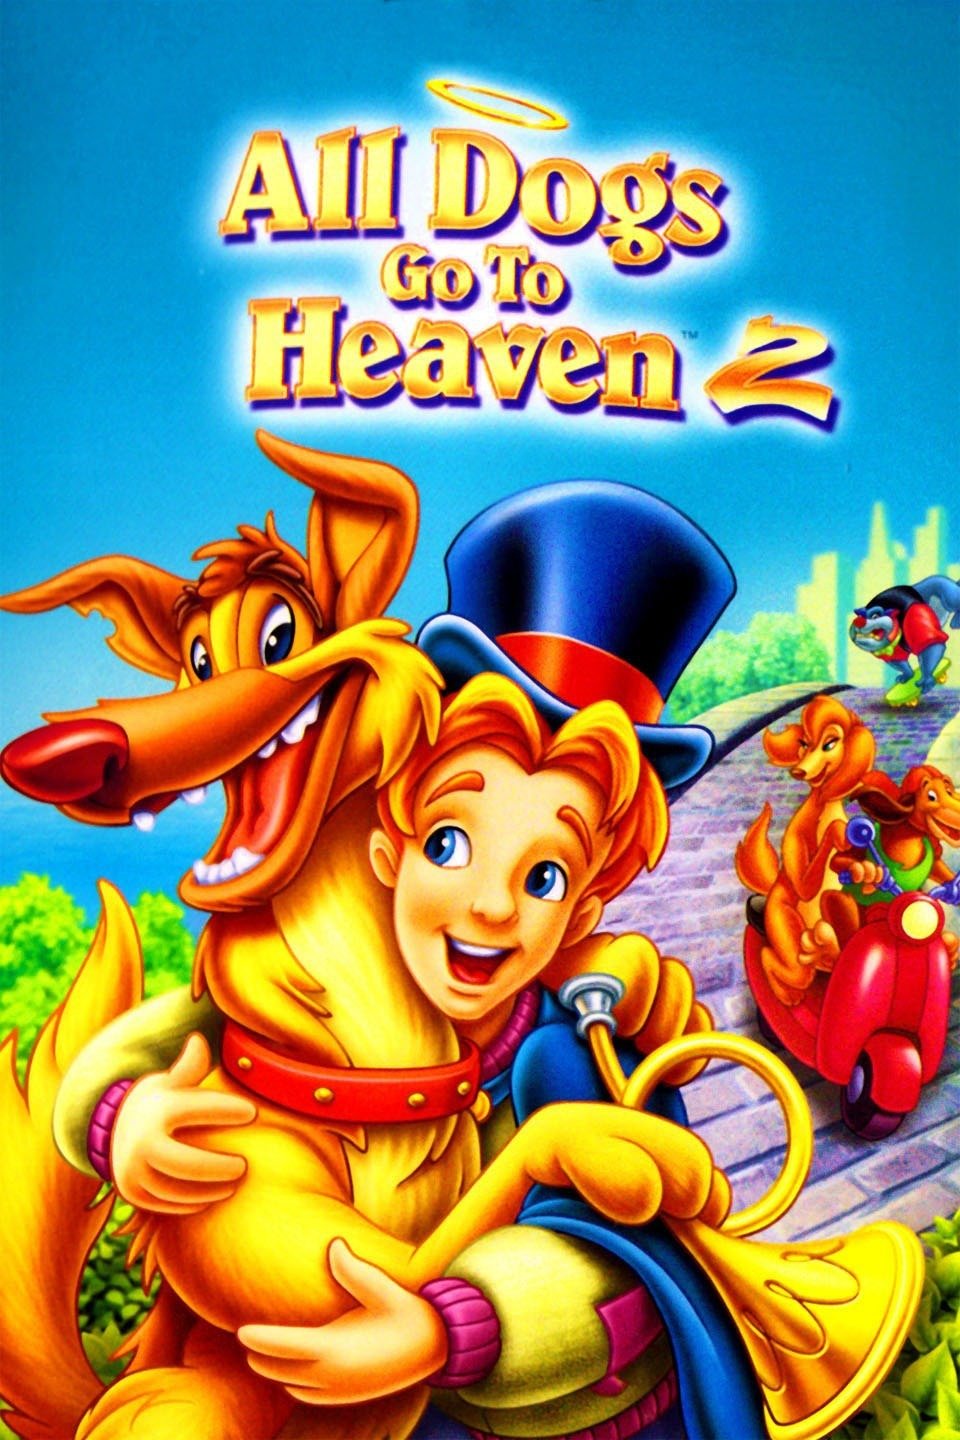 All Dogs Go to Heaven 2 - Rotten